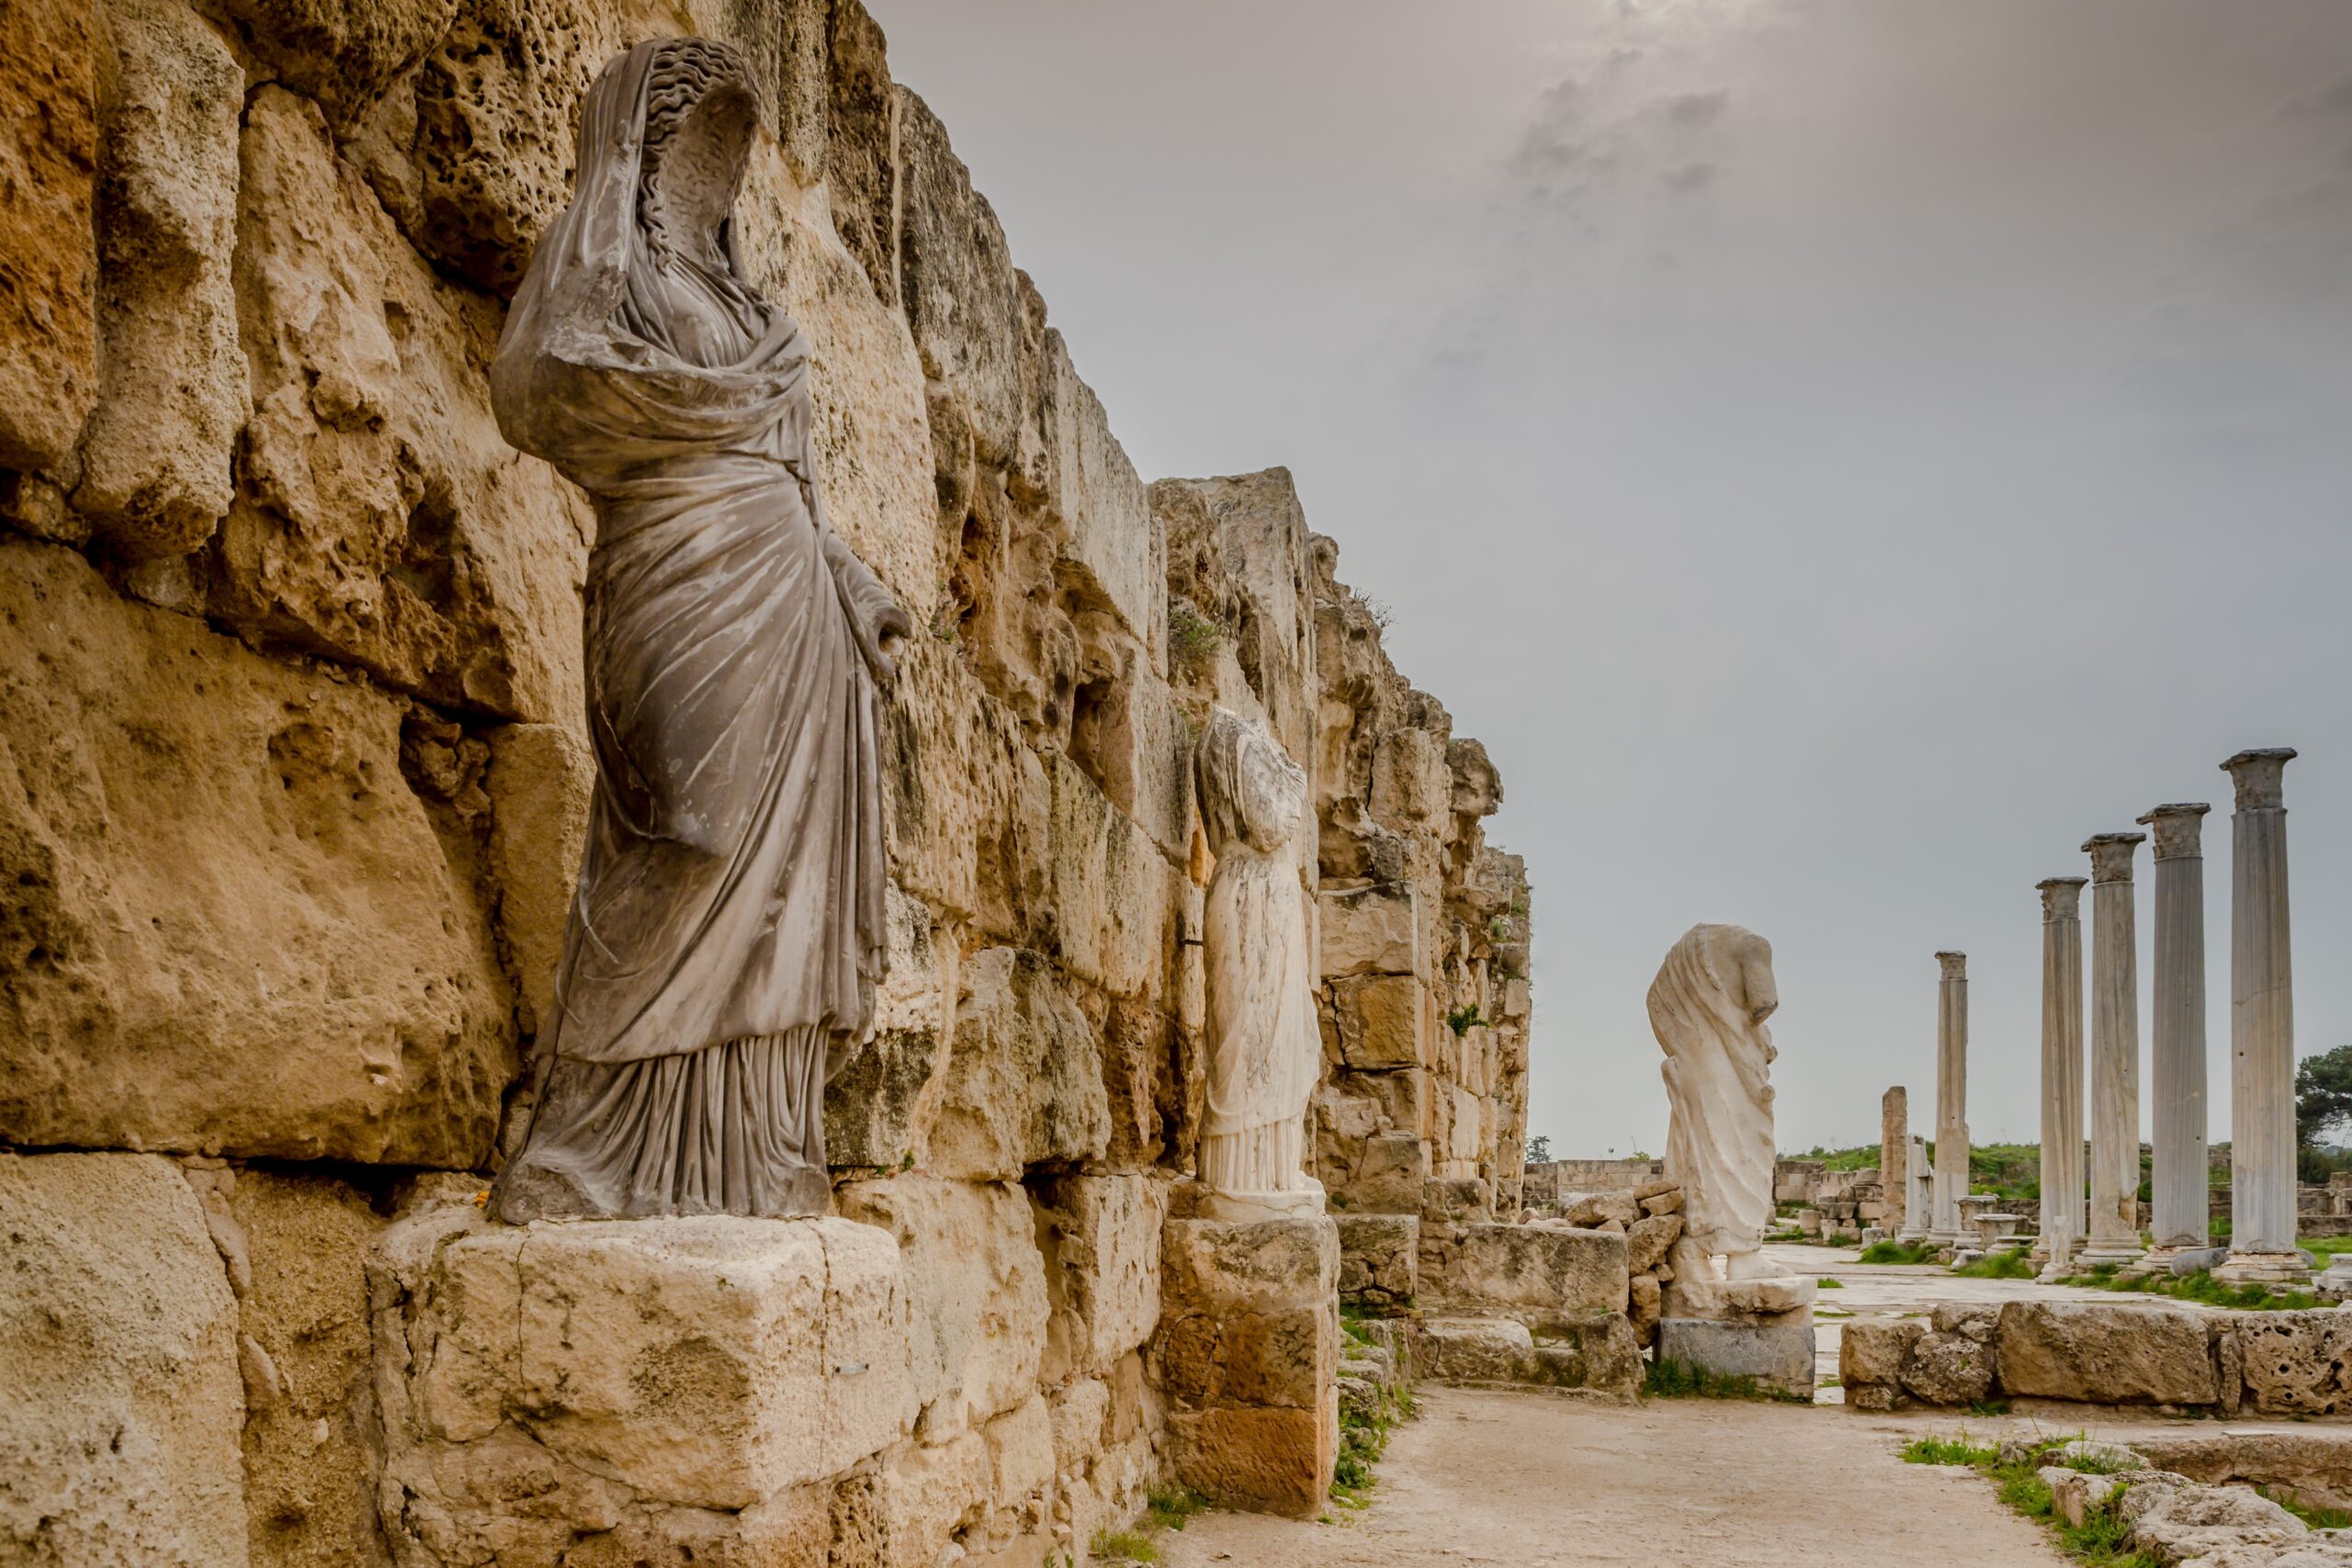 Statue amidst the ancient ruins of Salamis in Famagusta, Cyprus.